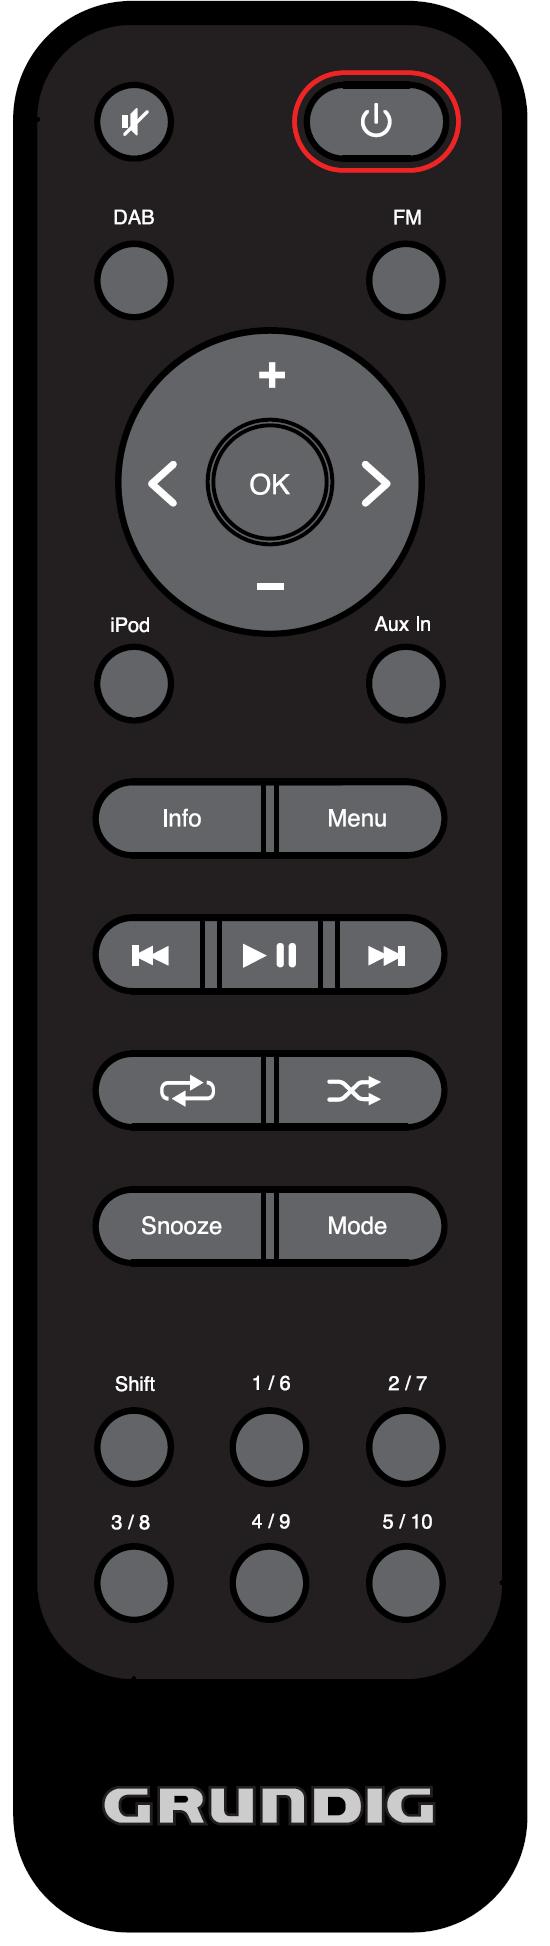 Your DAB+ Micro System Remote Control Press the Repeat Button to repeat play of the ipod. Press continually to scroll through repeat options.